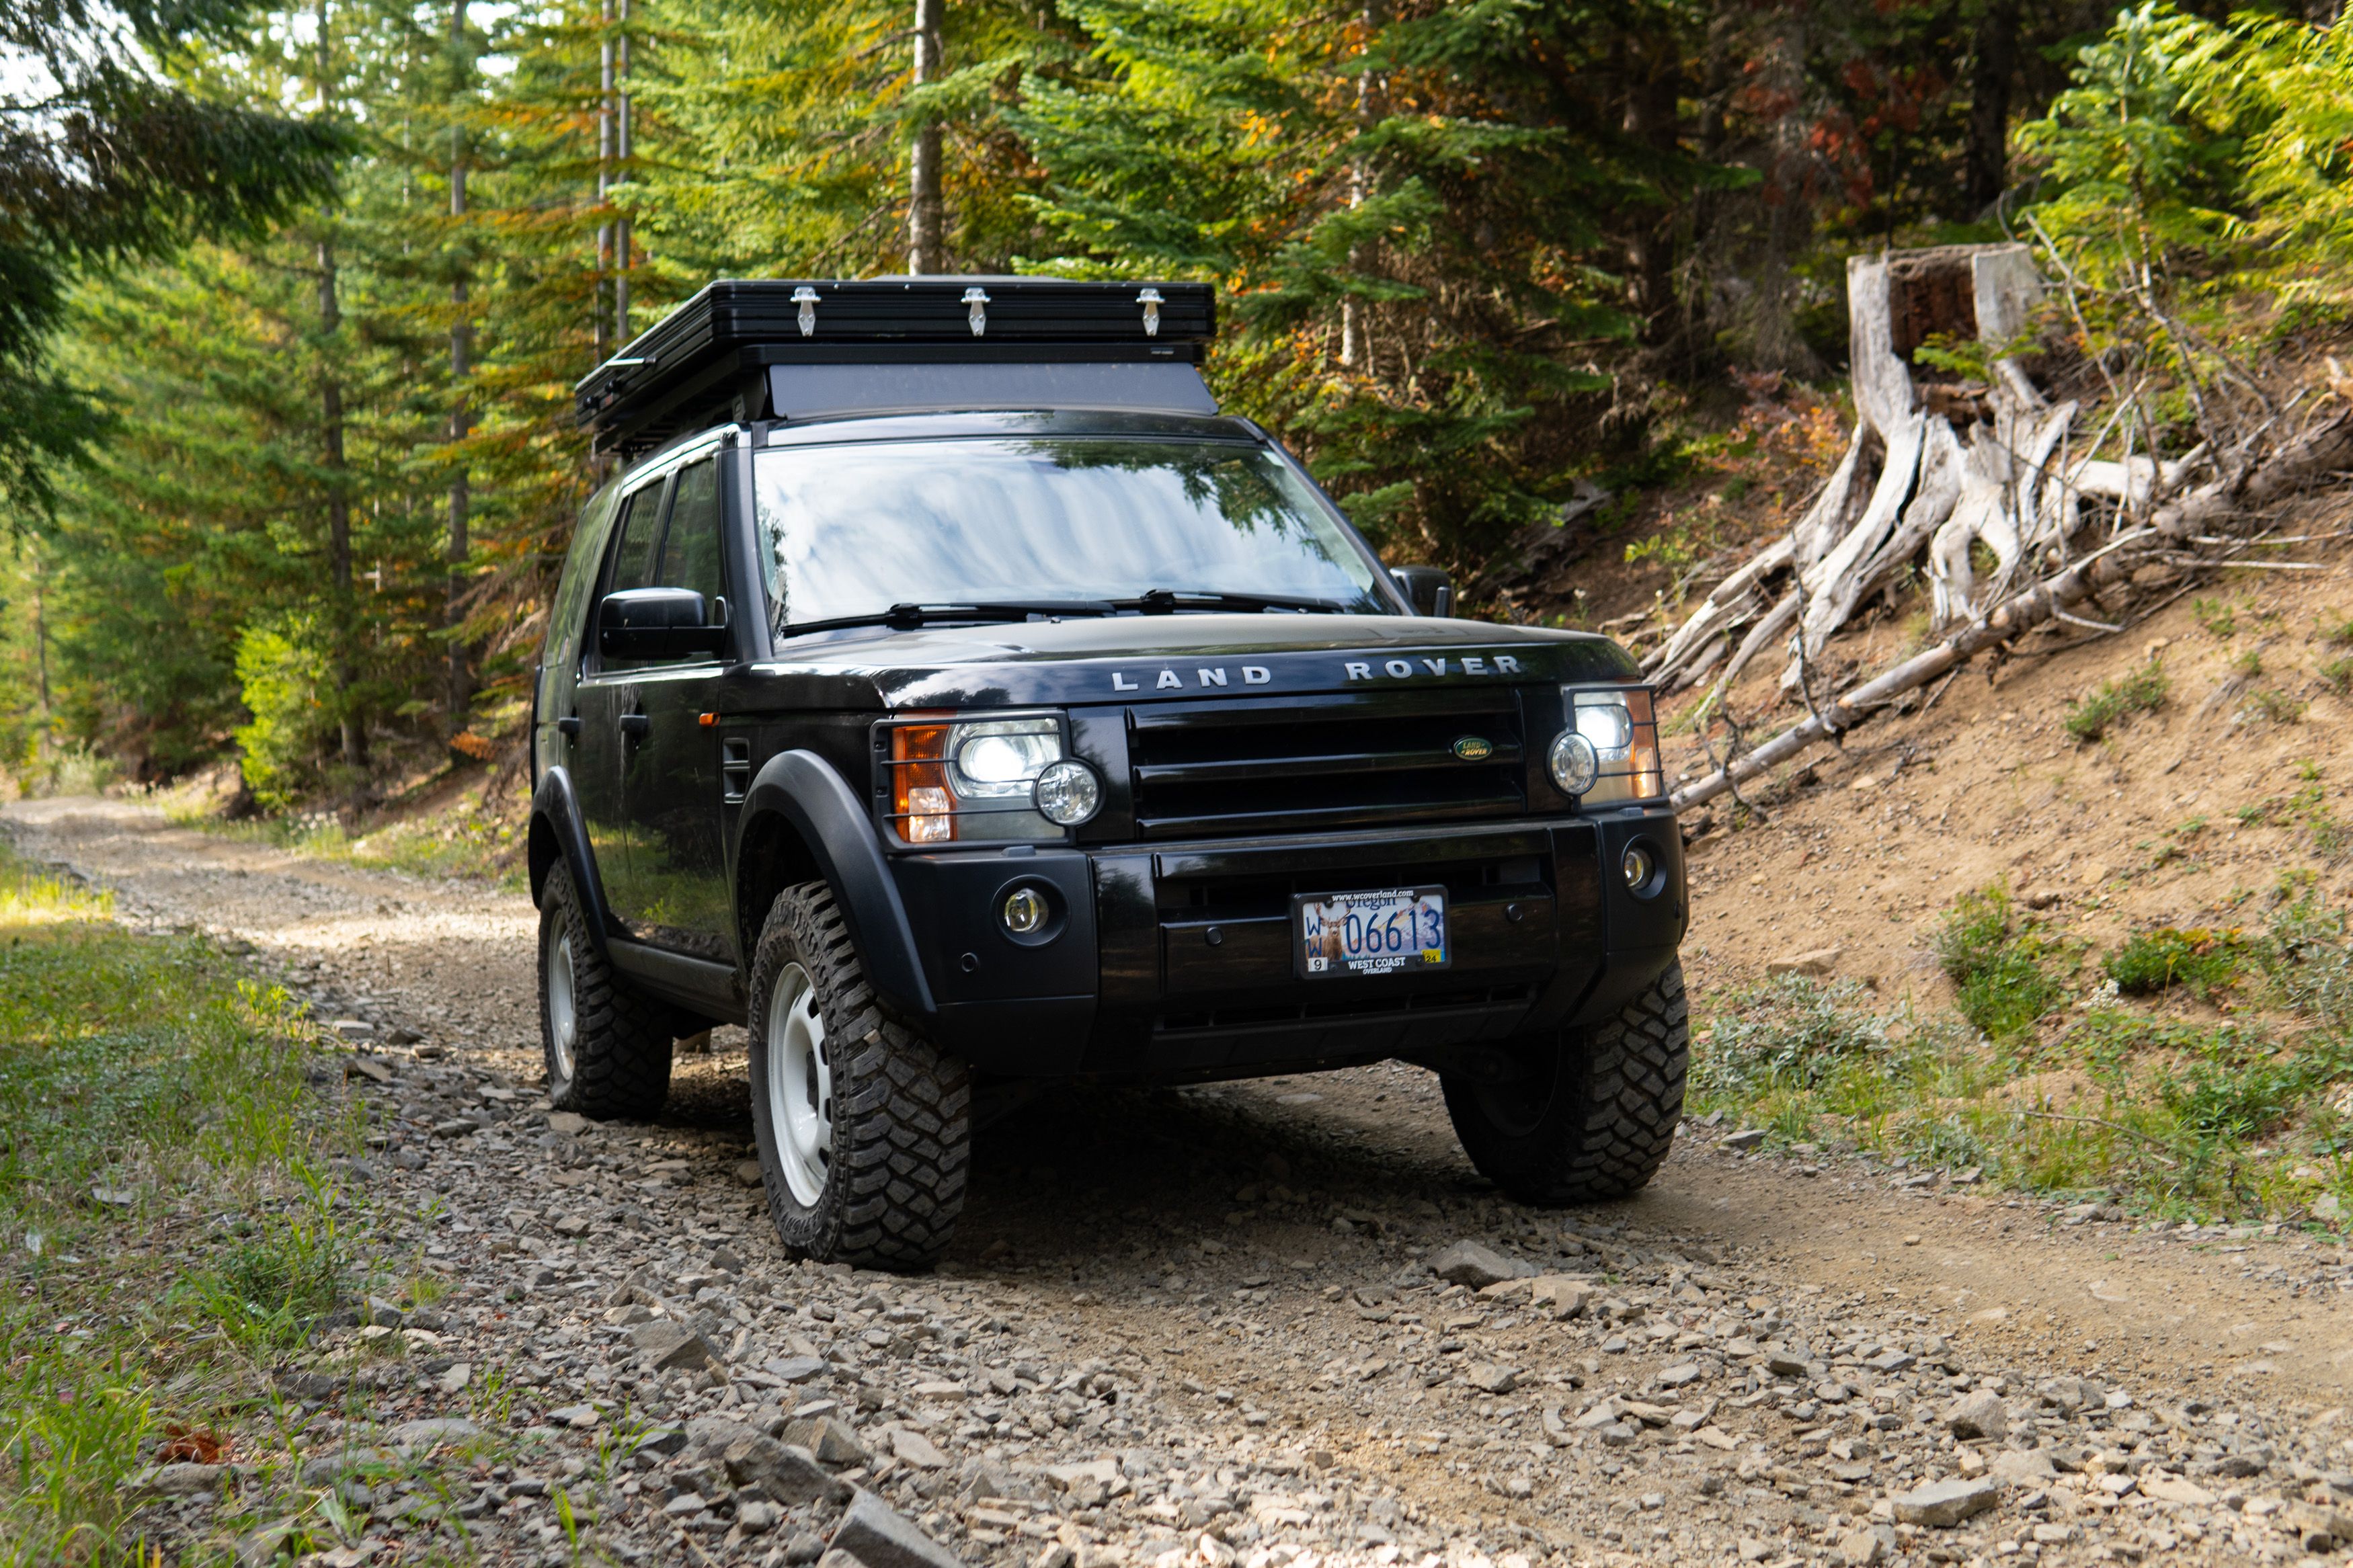 Land Rover Discovery 5 continues with the off-road tradition